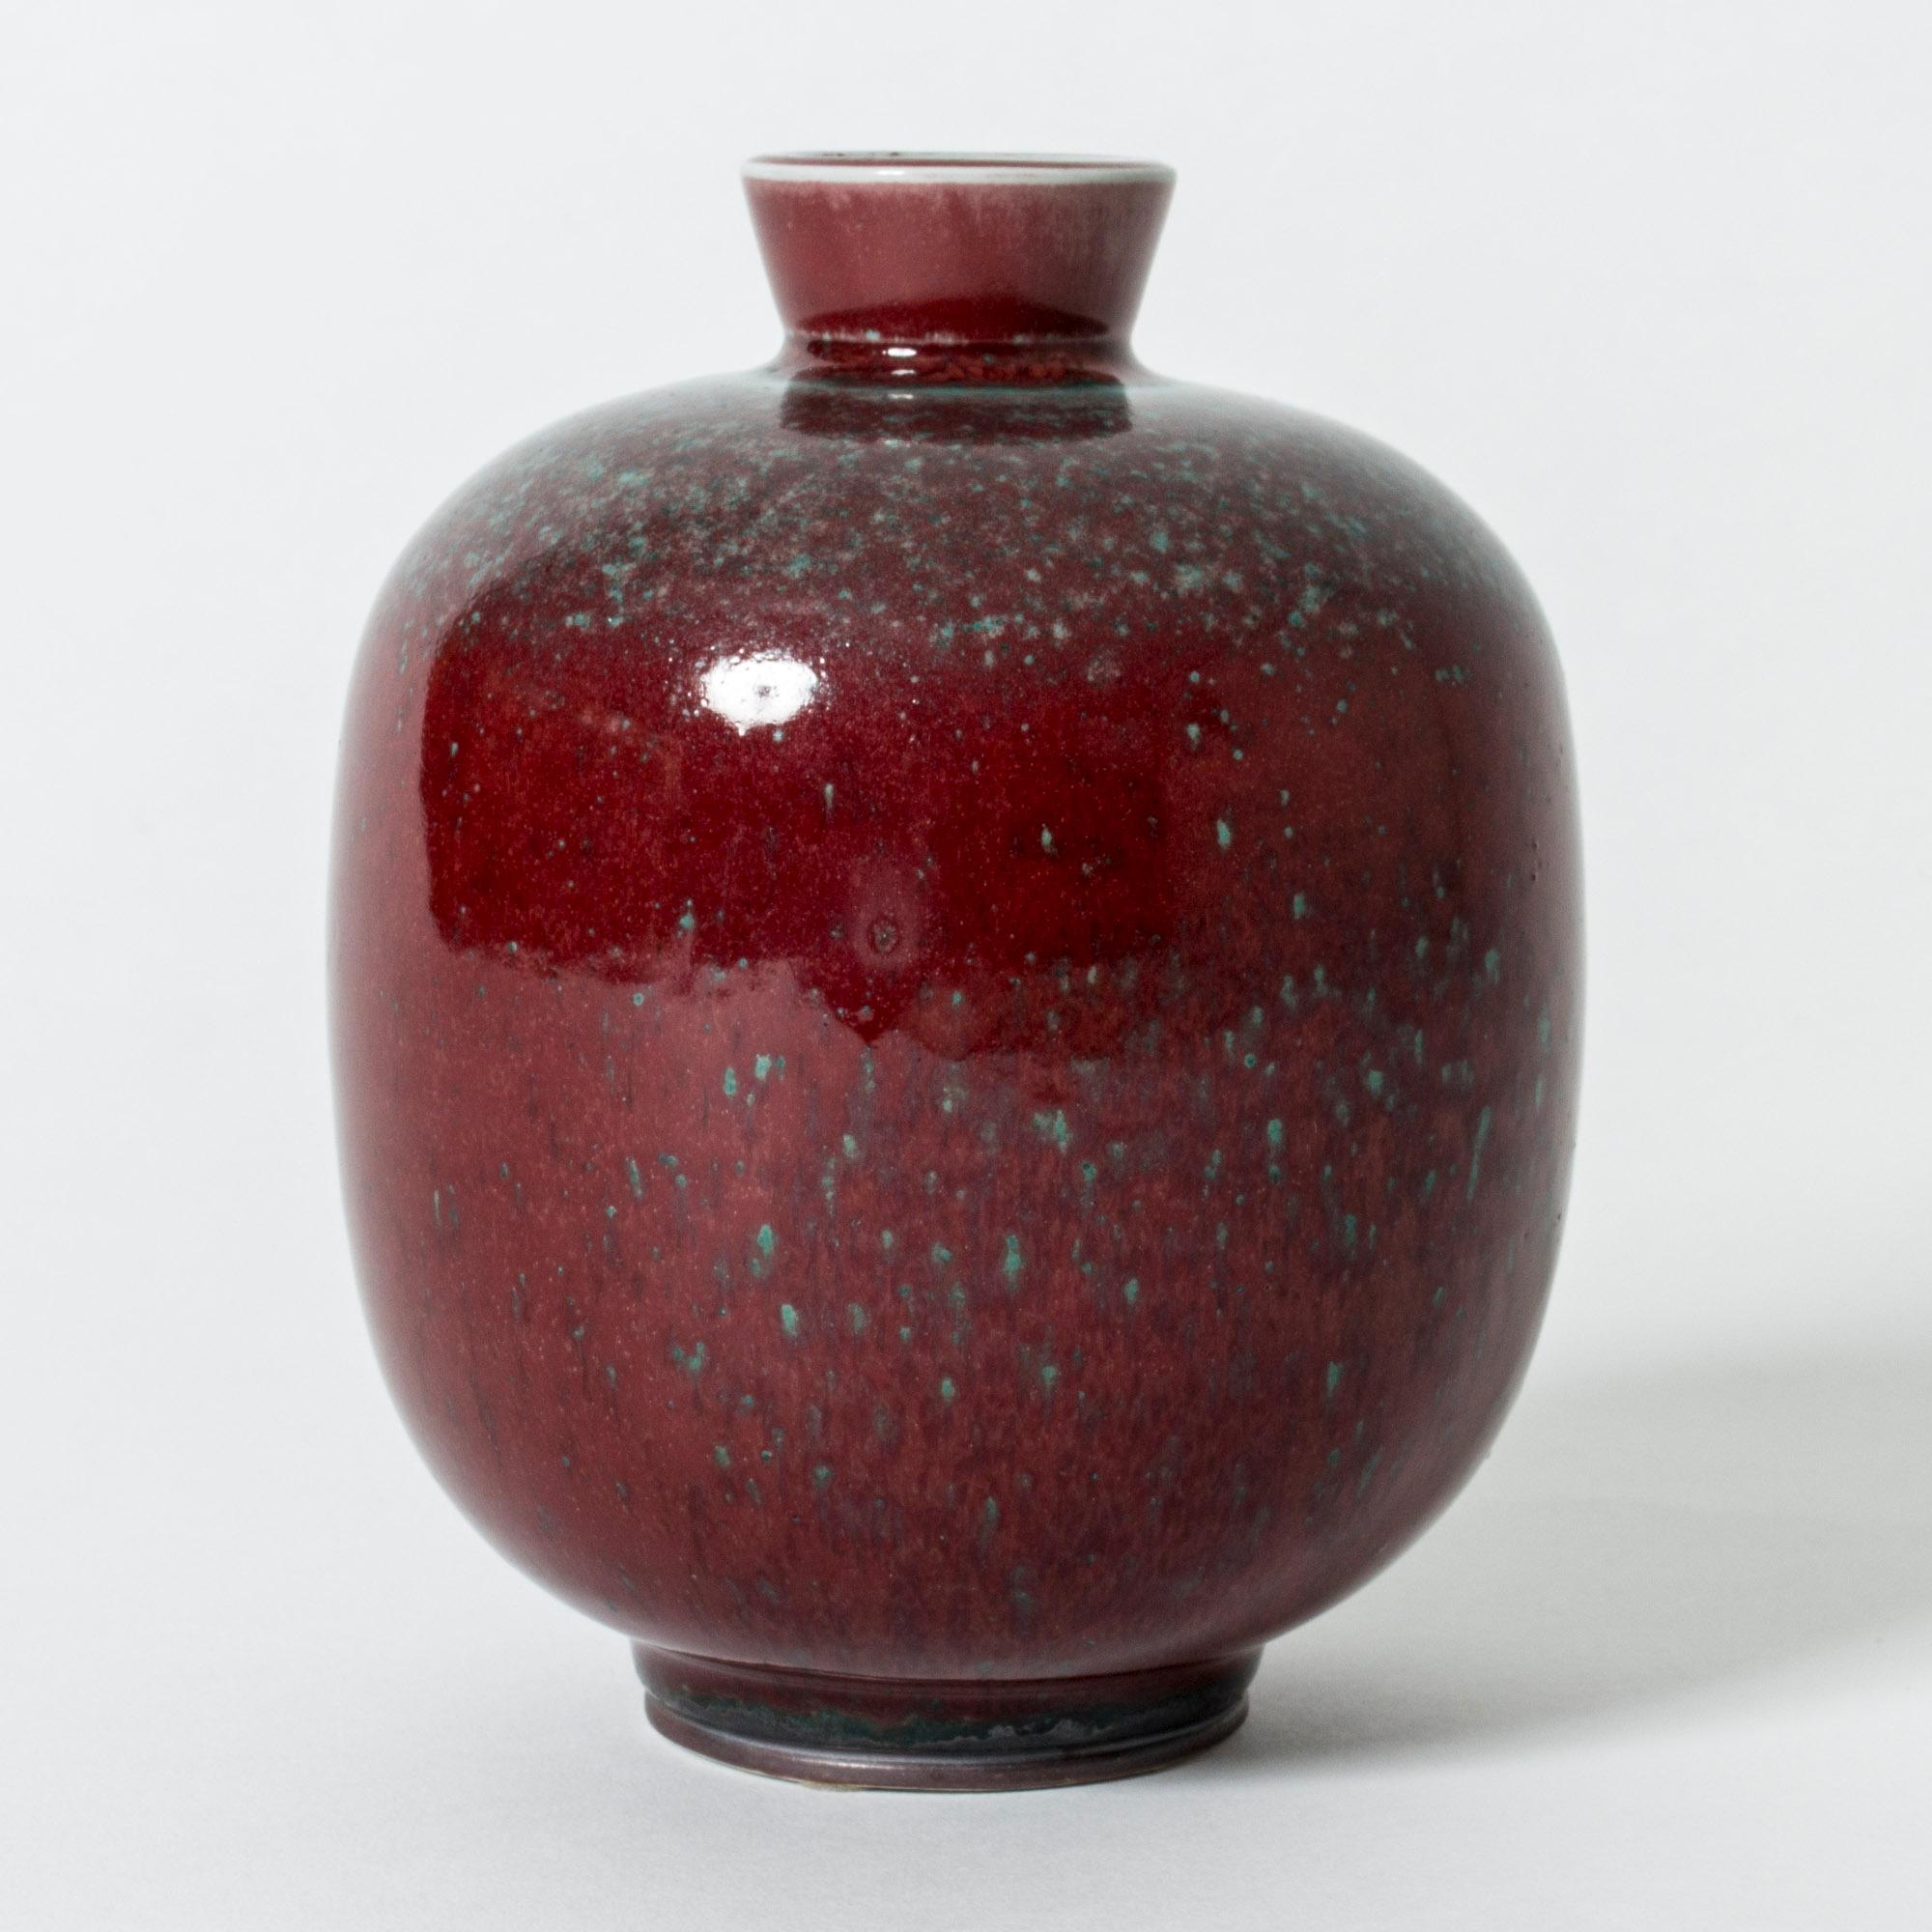 Stoneware vase by Berndt Friberg in plump form with deep and lustrous oxblood glaze, contrasted with blueish-green speckles.